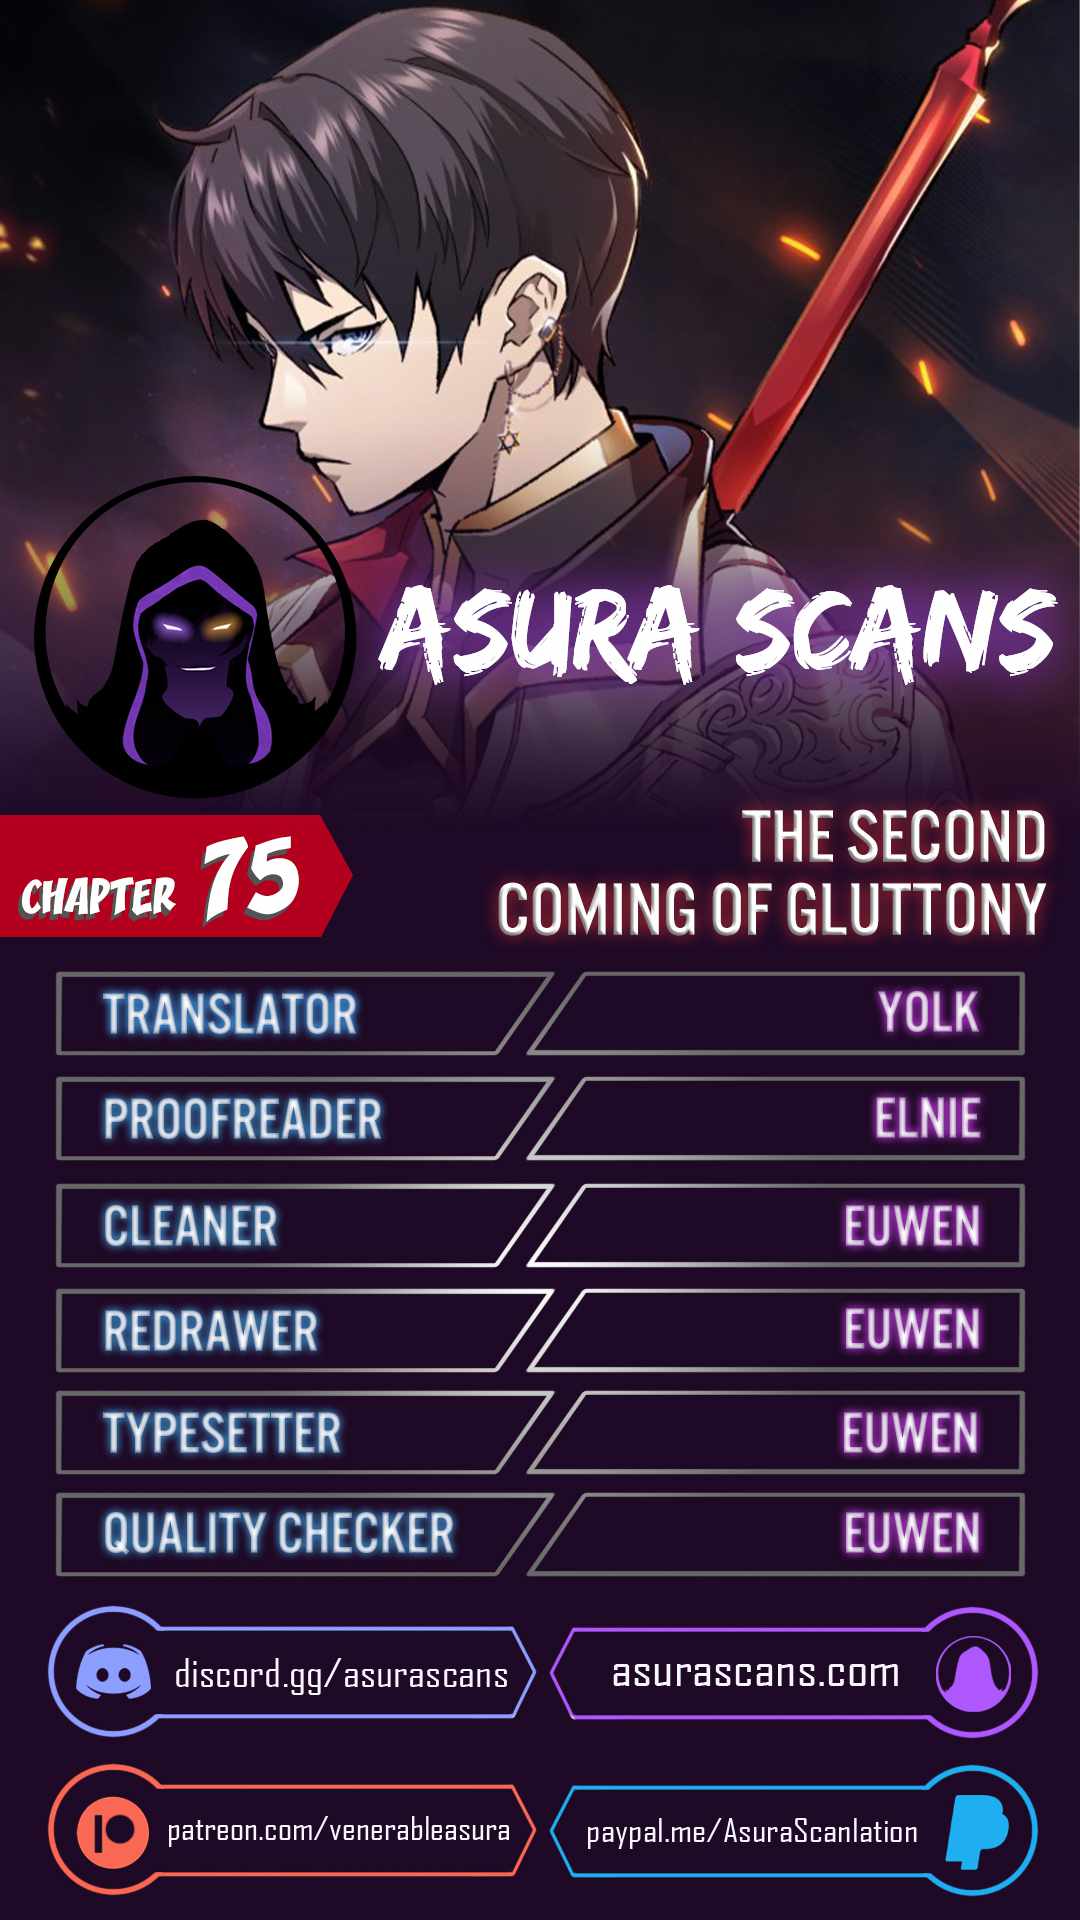 The Second Coming of Gluttony Chapter 75, The Second Coming of Gluttony 75, Read The Second Coming of Gluttony Chapter 75, The Second Coming of Gluttony Chapter 75 Manga, The Second Coming of Gluttony Chapter 75 english, The Second Coming of Gluttony Chapter 75 raw manga, The Second Coming of Gluttony Chapter 75 online, The Second Coming of Gluttony Chapter 75 high quality, The Second Coming of Gluttony 75 chapter, The Second Coming of Gluttony Chapter 75 manga scan